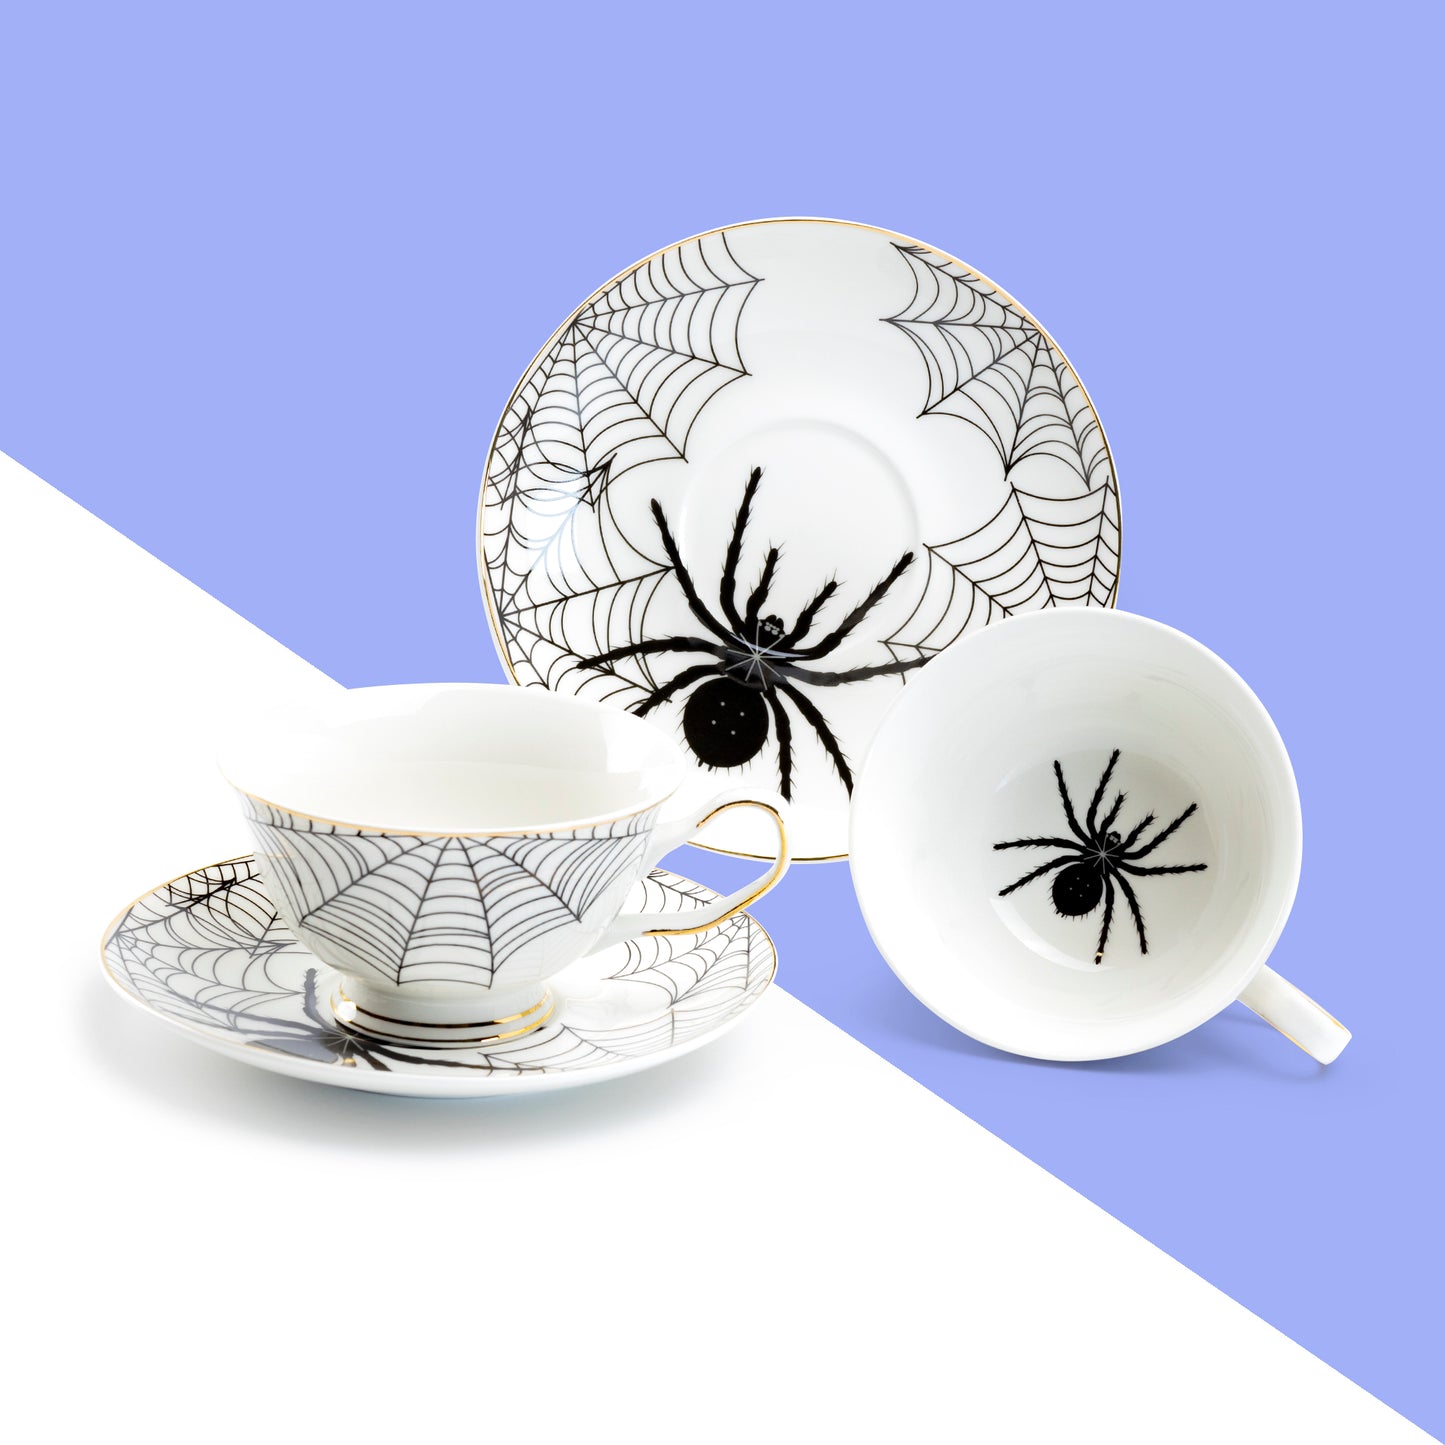 Witches Brew Pitcher + 4 Assorted Halloween Tea Cup and Saucer Sets - Arsenic Skull & Spider